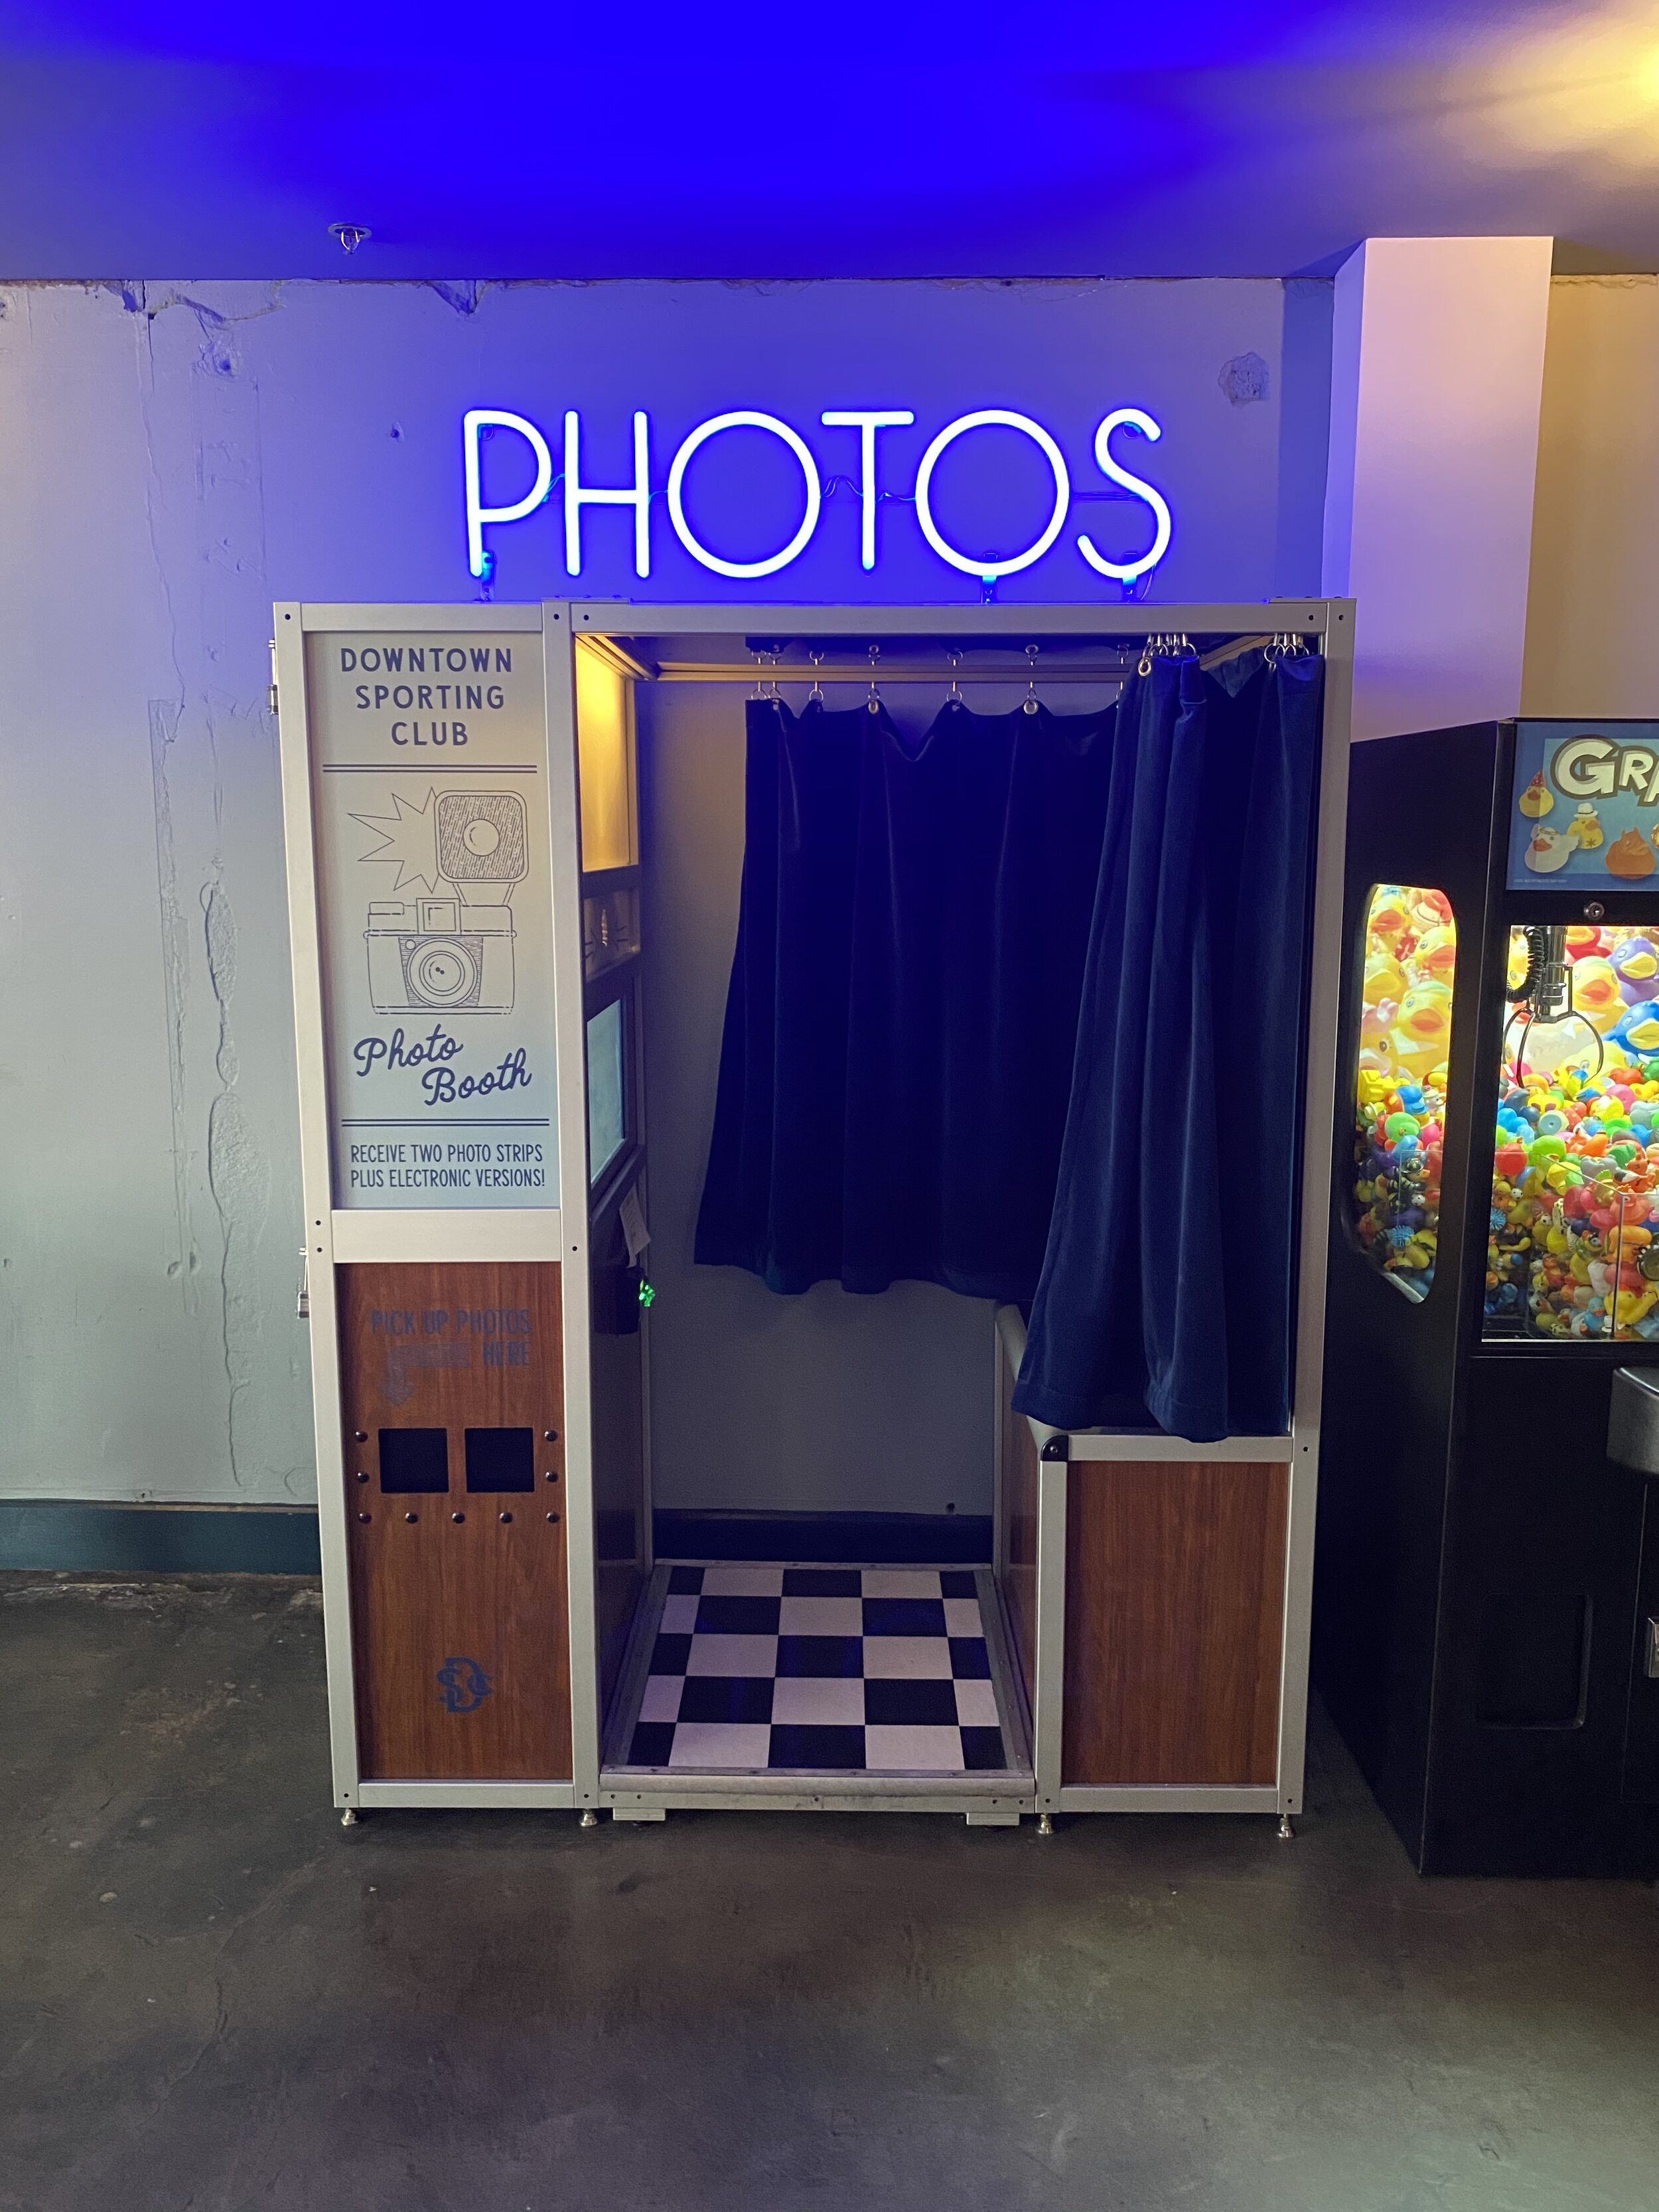 10 Questions to ask before you book the Photo Booth Photo Booth IMG 2598